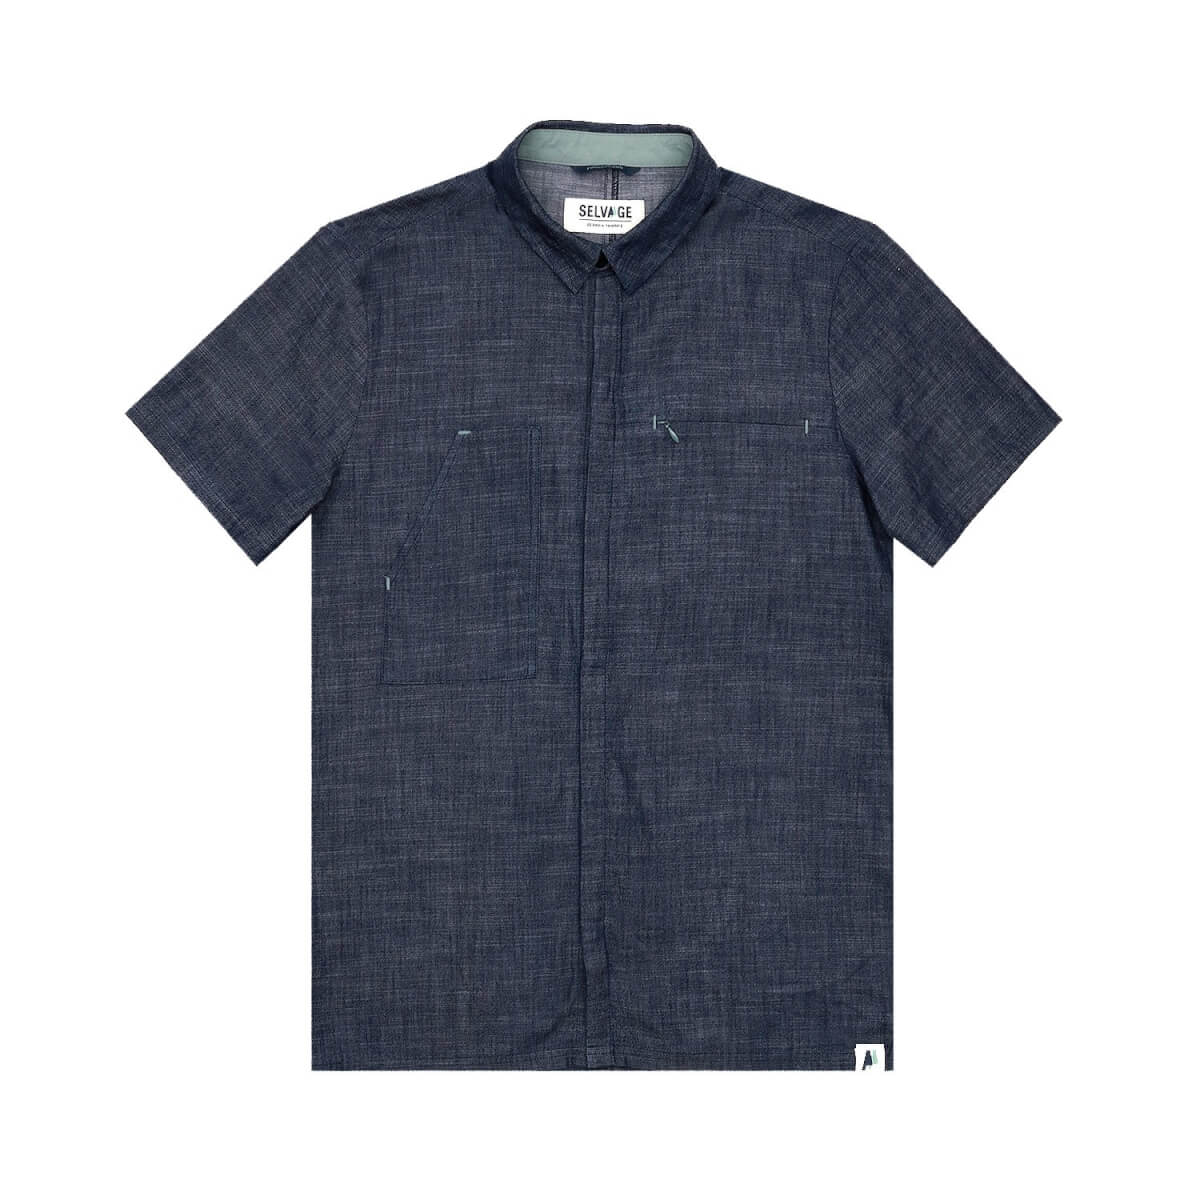 Men's Utility S/S Shirt Small SELVAAGE